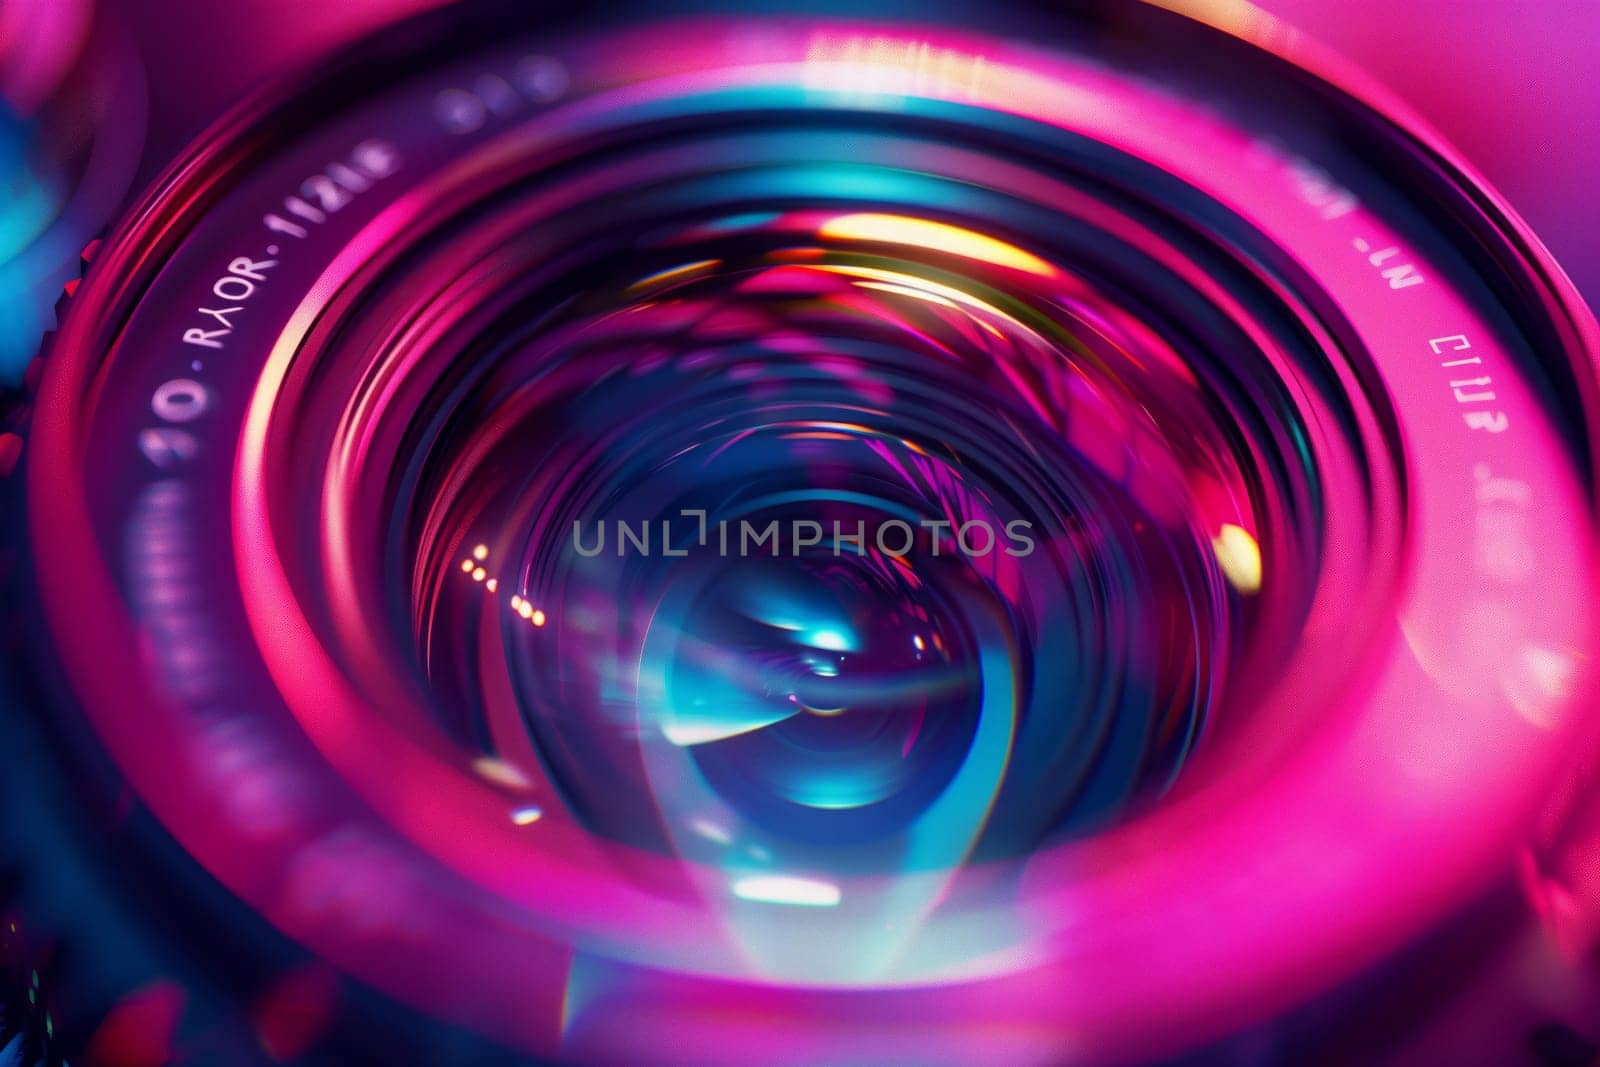 Vibrant purple and electric blue hues swirl around a camera lens, creating a colorful and fluid backdrop for photography enthusiasts